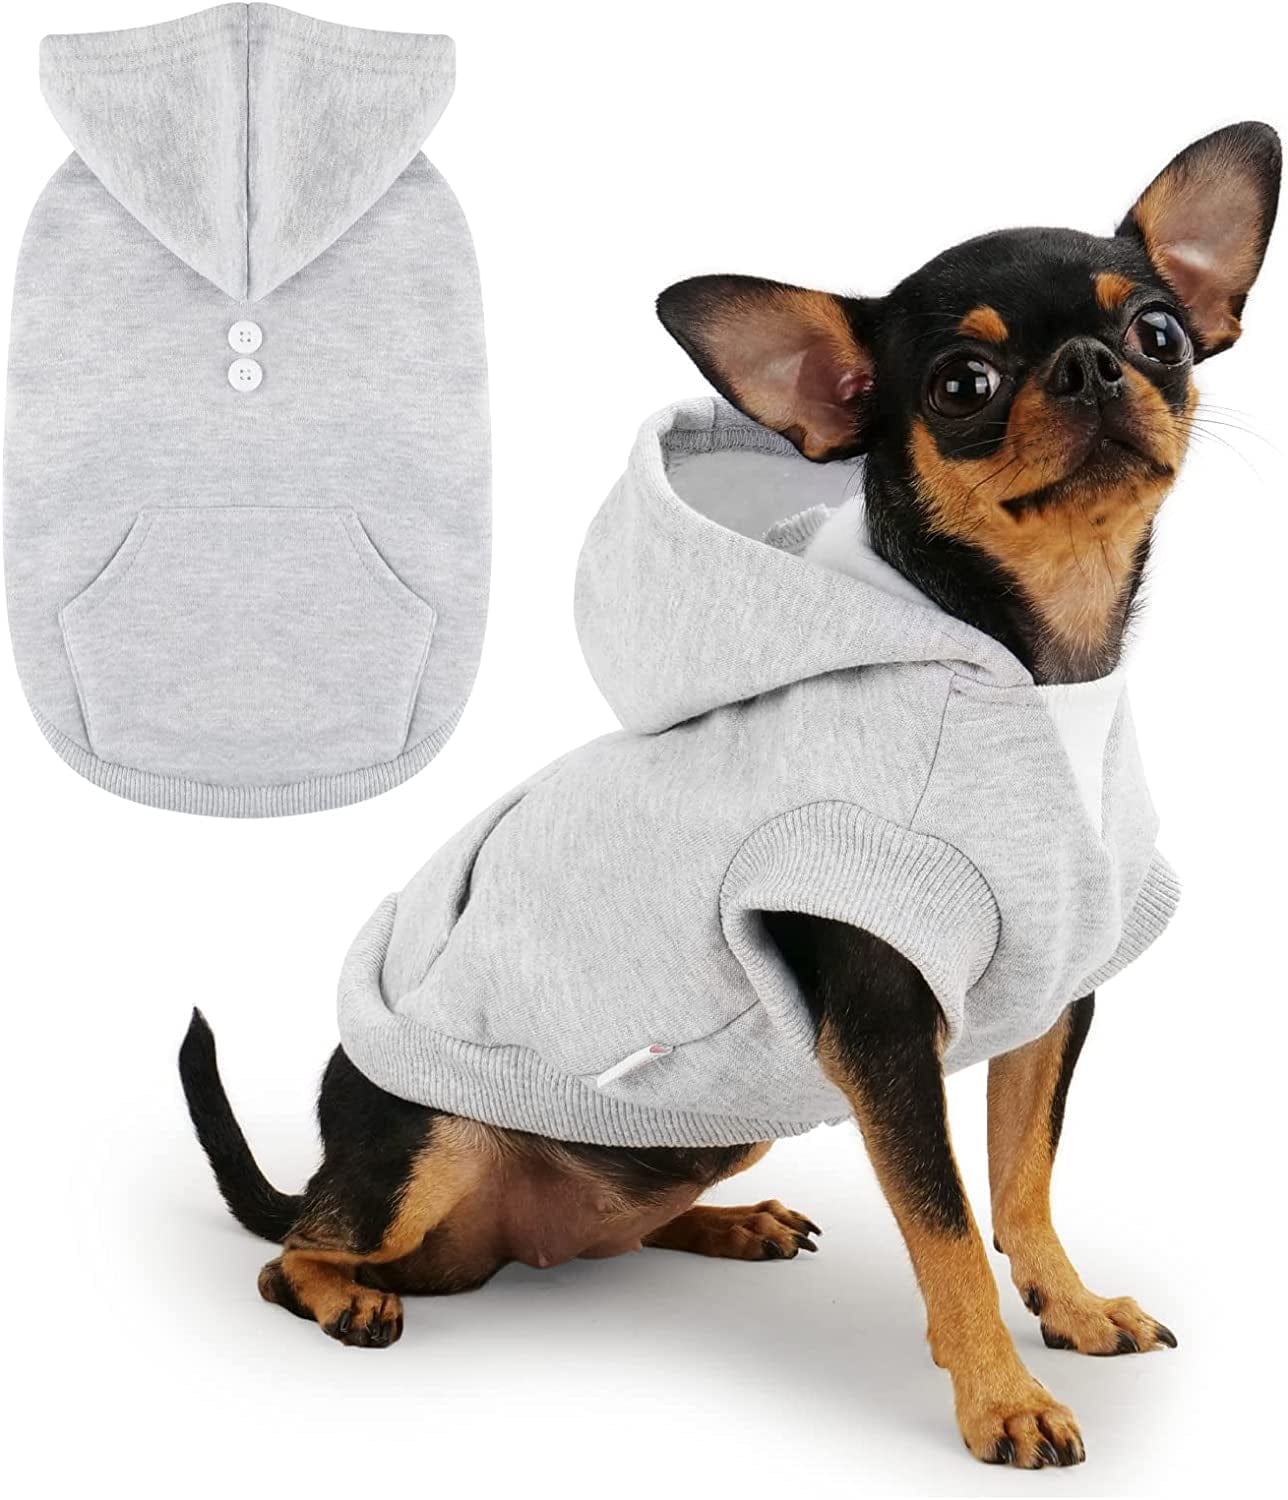 𝐍𝐄𝐖 𝐀𝐑𝐑𝐈𝐕𝐀𝐋 Frienperro Dog Clothes for Small Dogs Girl Boy, 100% Cotton Buffalo Plaid Small Dog Hoodie, Chihuahua Clothes Pet Cat Winter Warm Sweatshirt Sweater, Teacup Yorkie Puppy Coat Animals & Pet Supplies > Pet Supplies > Dog Supplies > Dog Apparel Frienperro Grey X-Small 